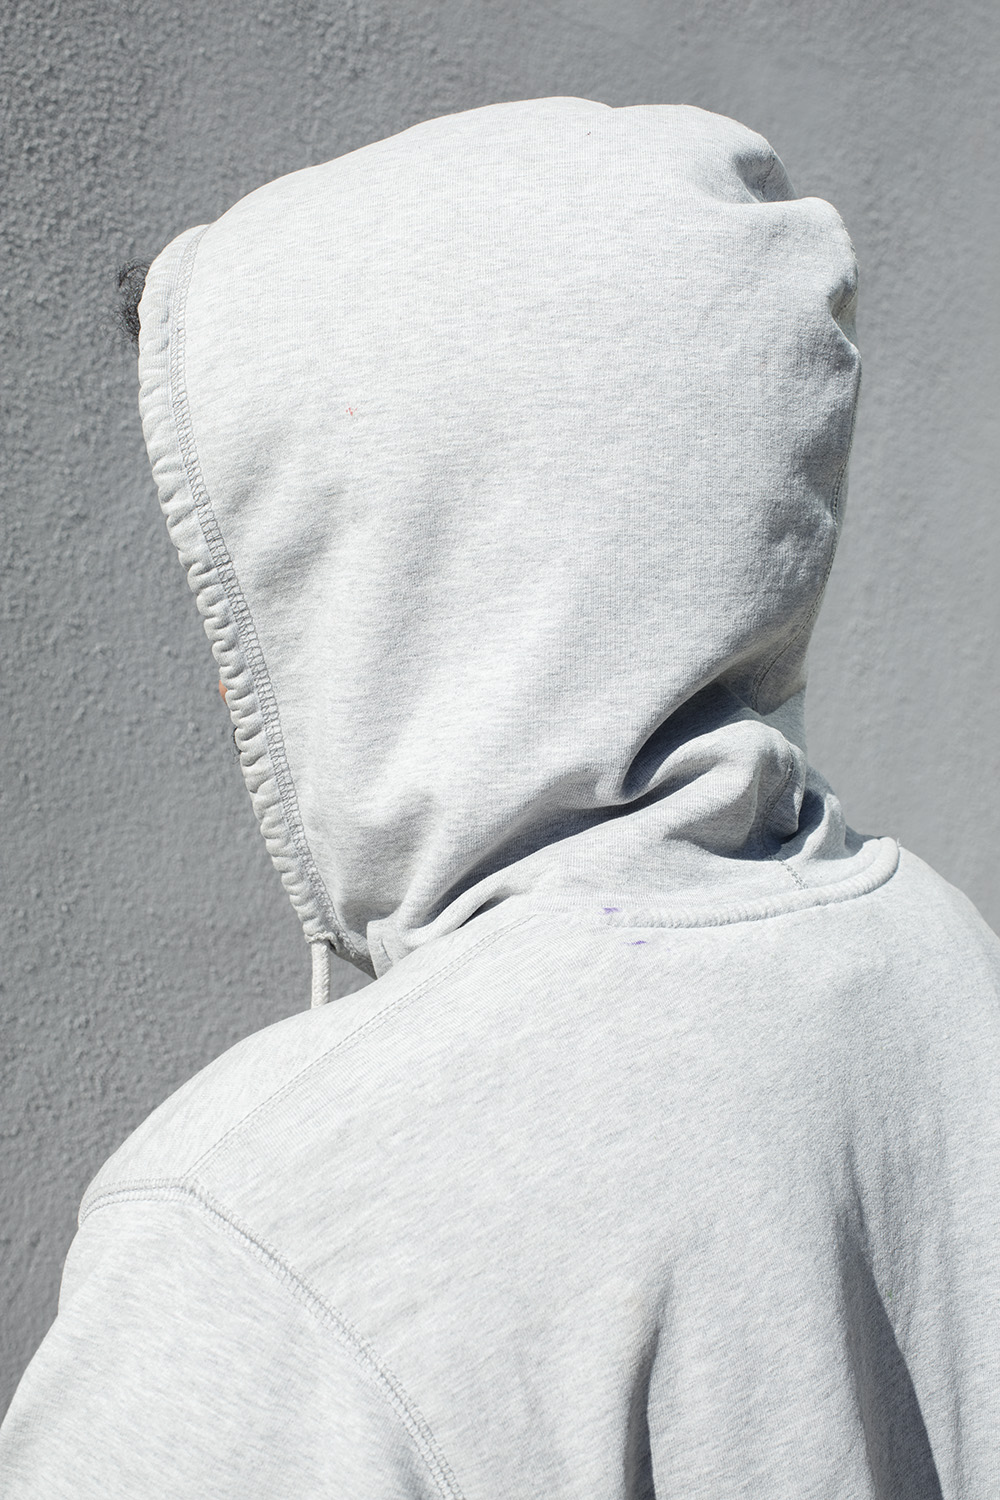 A person in a hoodie stands with their back to the viewer.